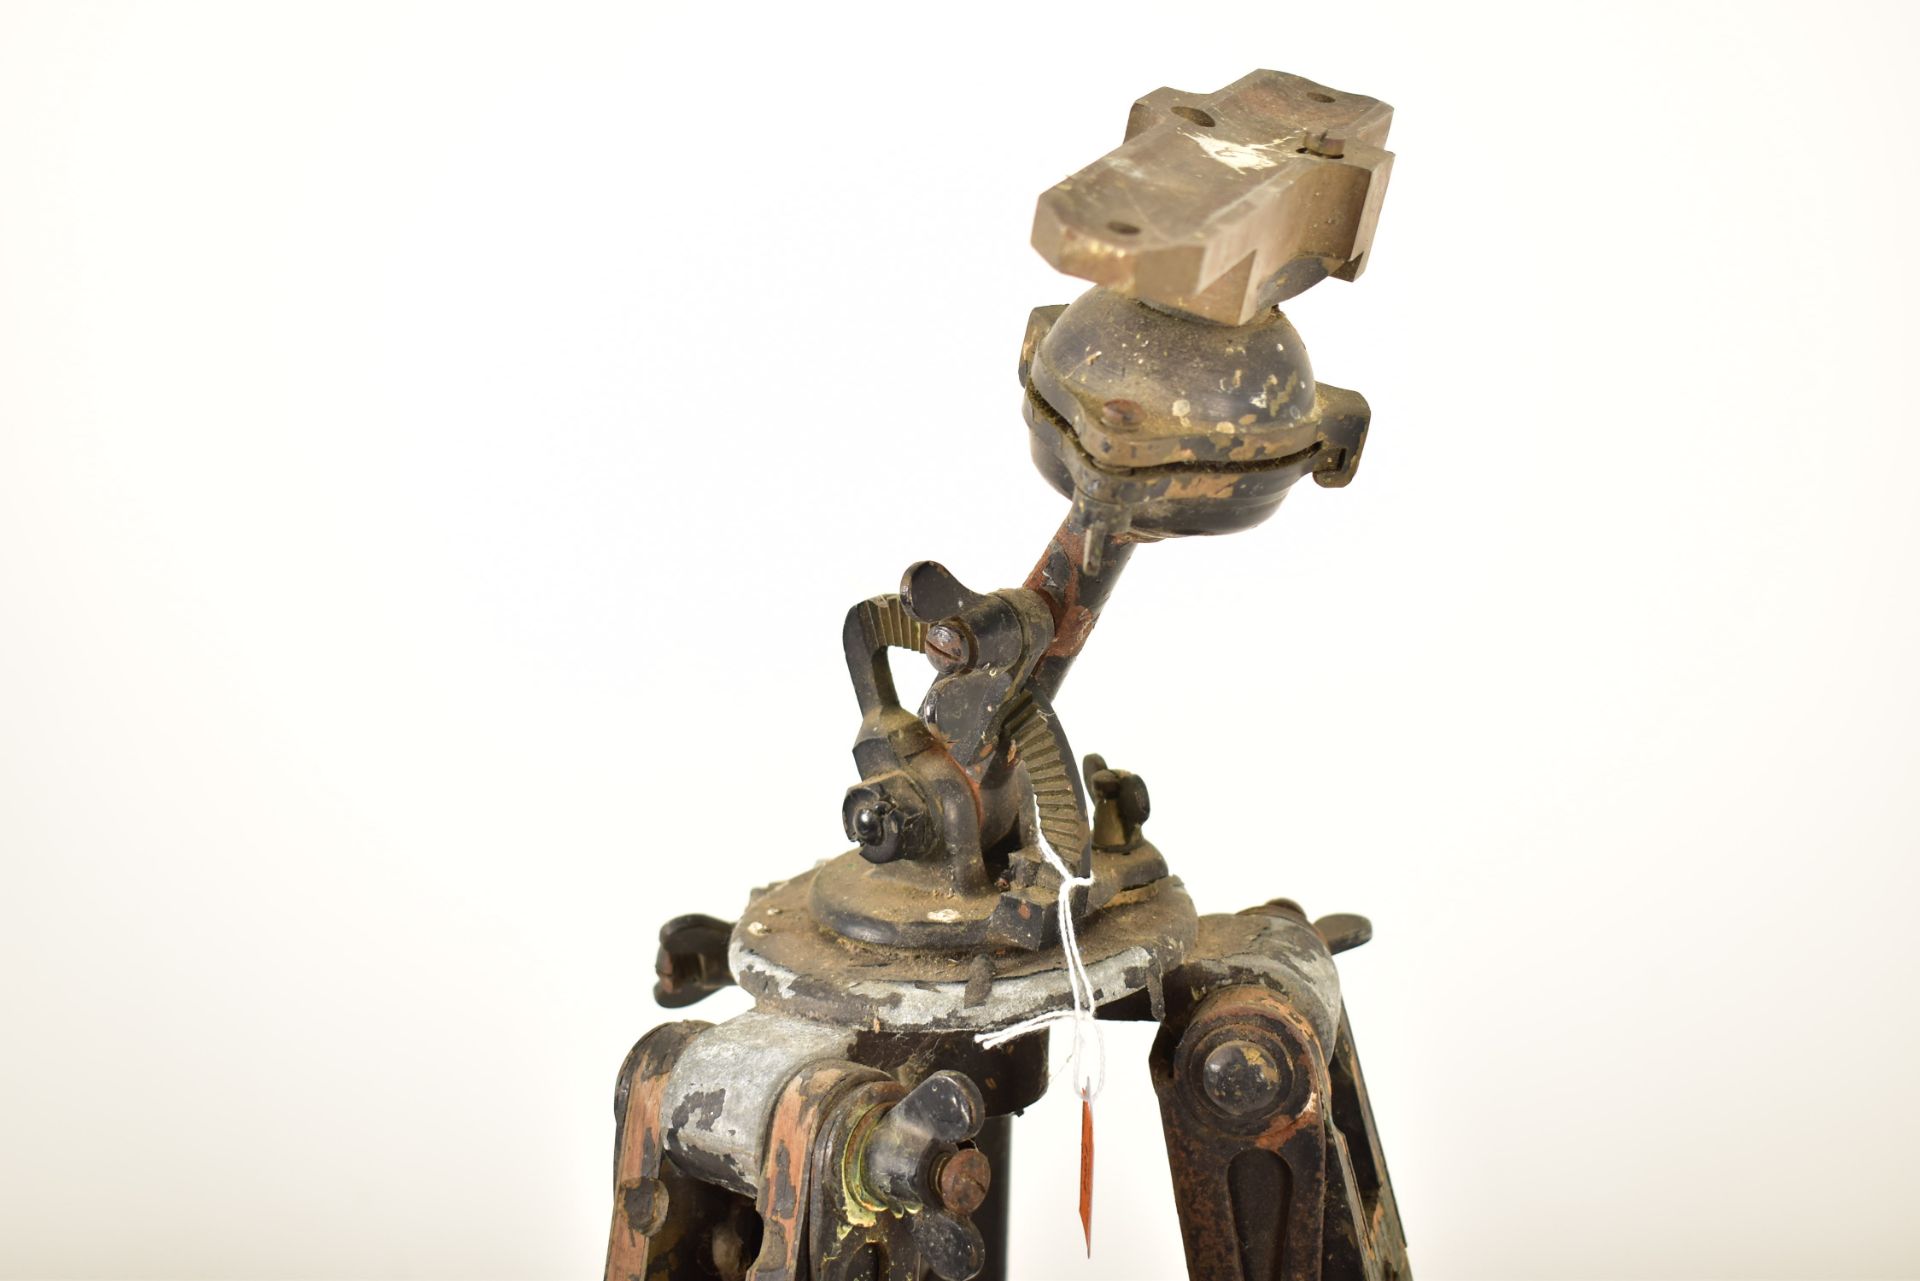 MID 20TH CENTURY WOOD & METAL MILITARY SURVEY TRIPOD STAND - Image 2 of 6